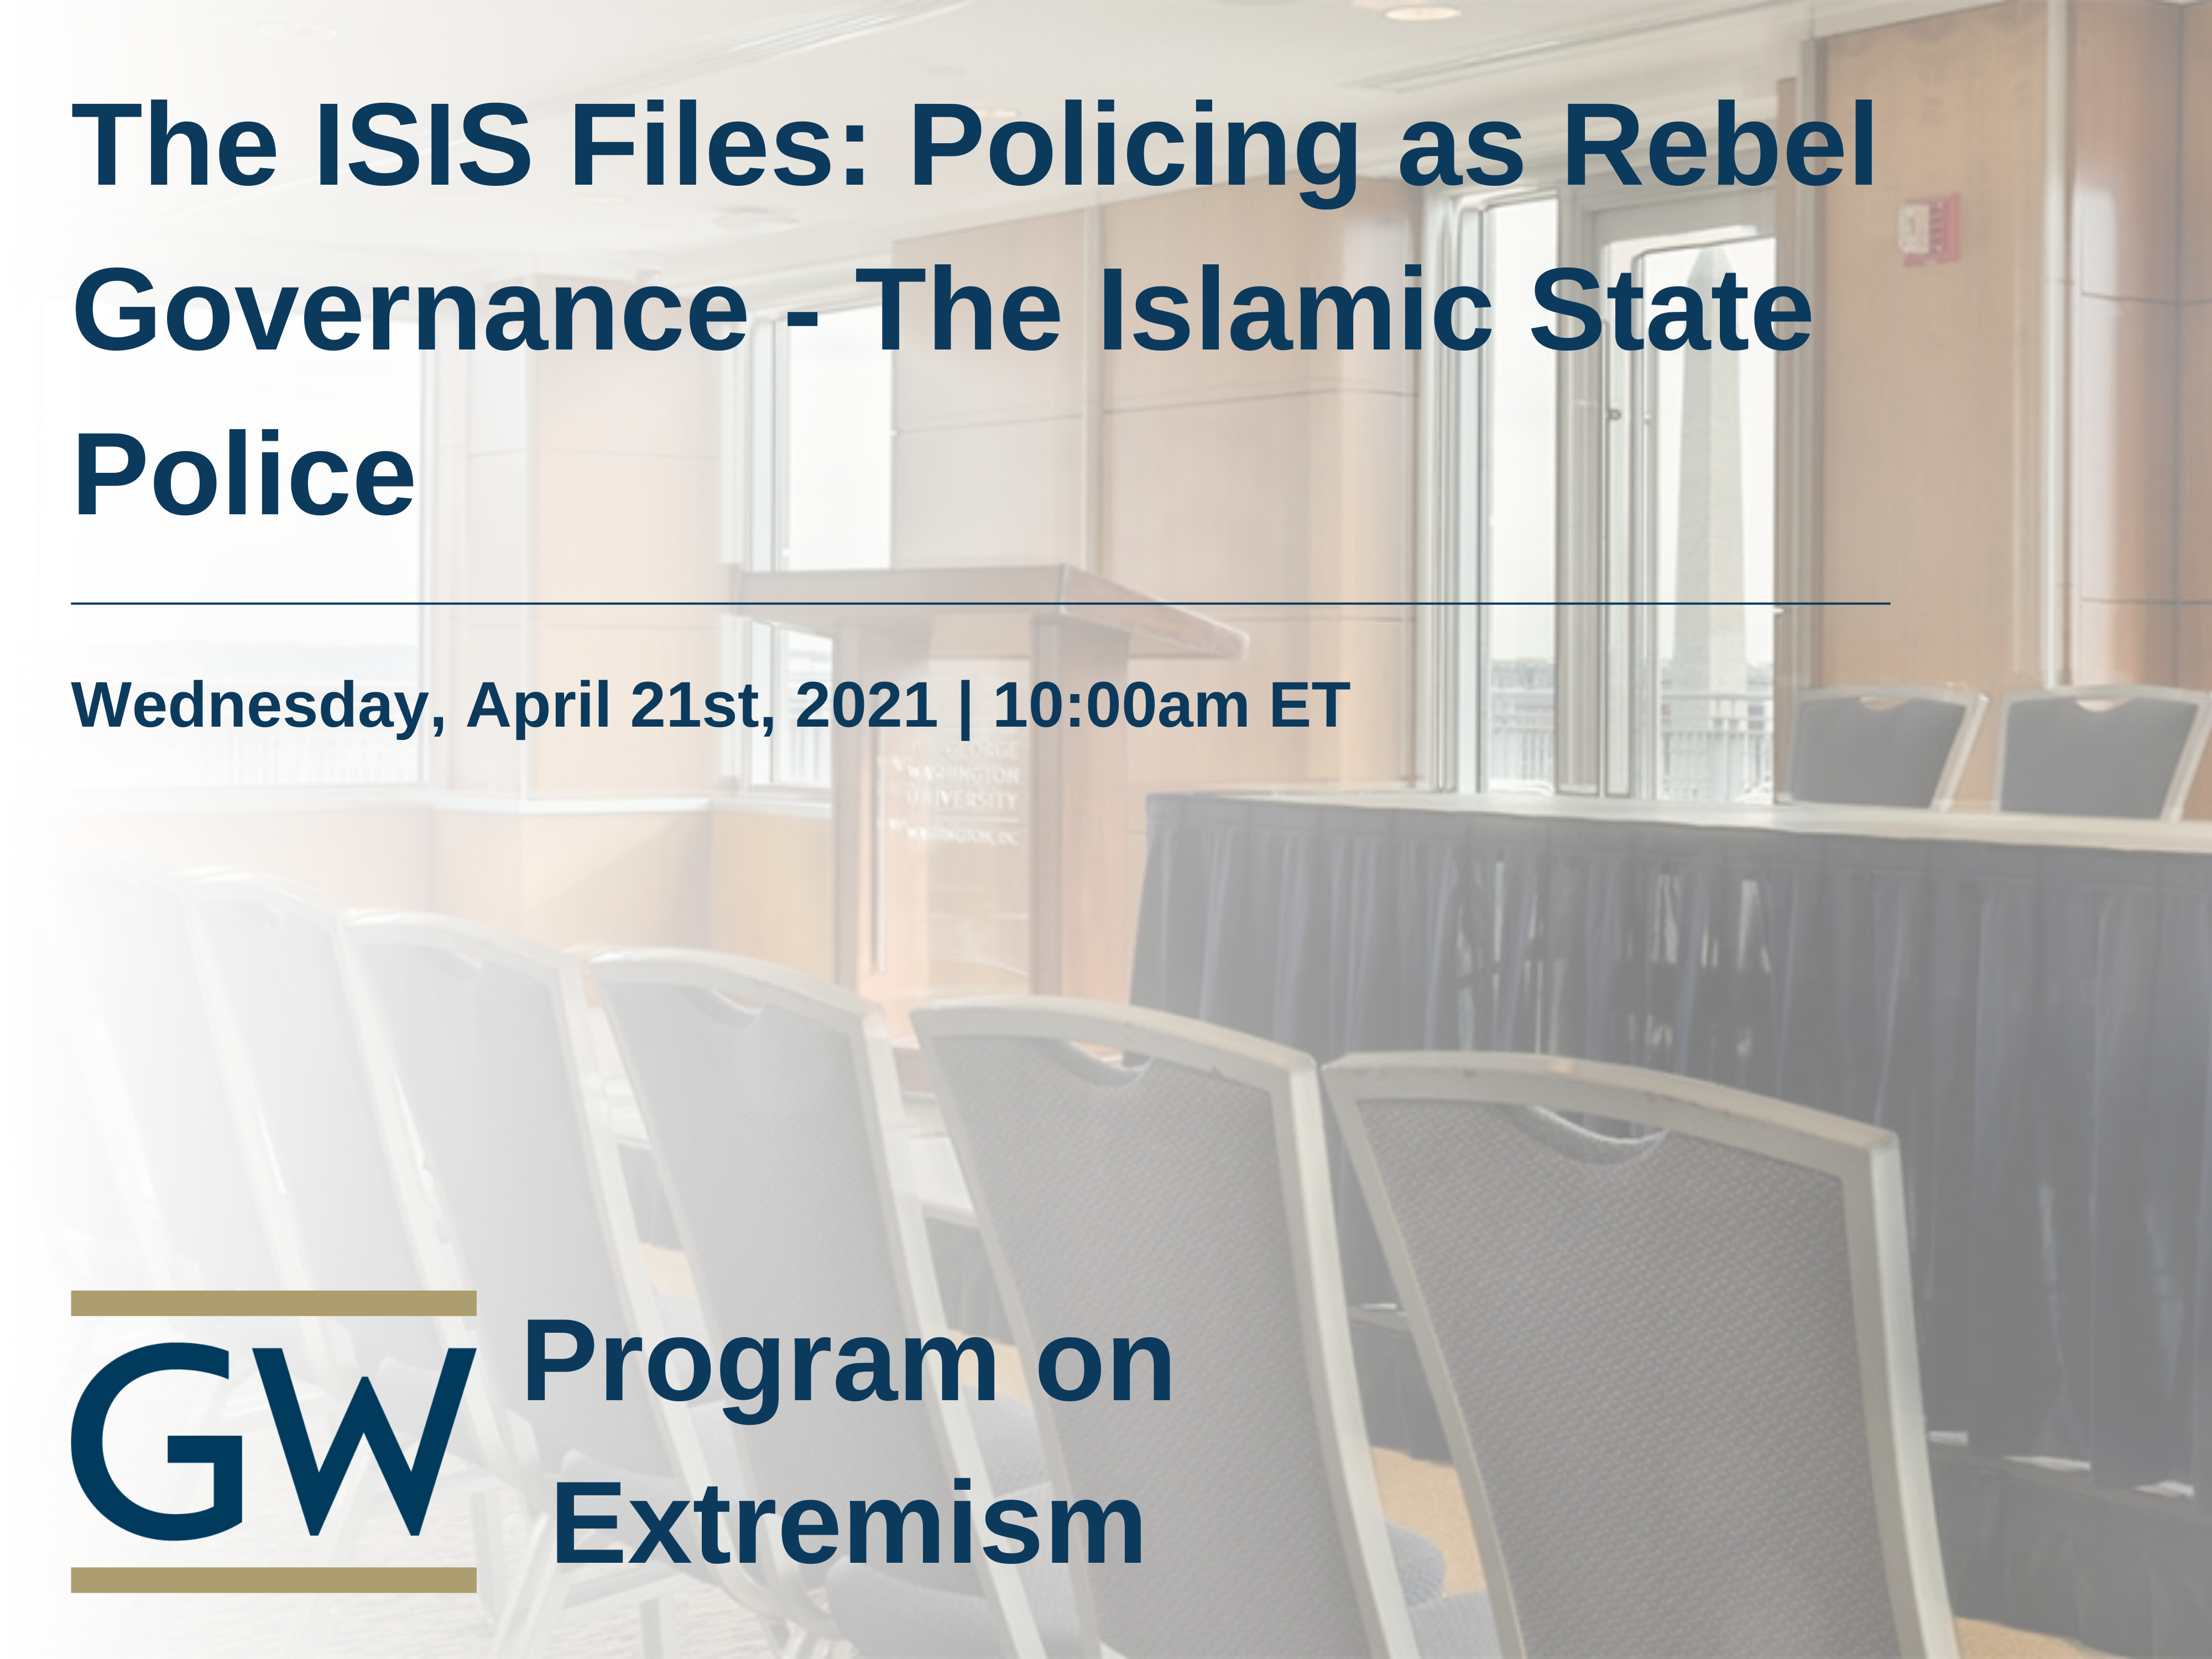 The ISIS Files- Policing as Rebel Governance: The Islamic State Police Event Banner